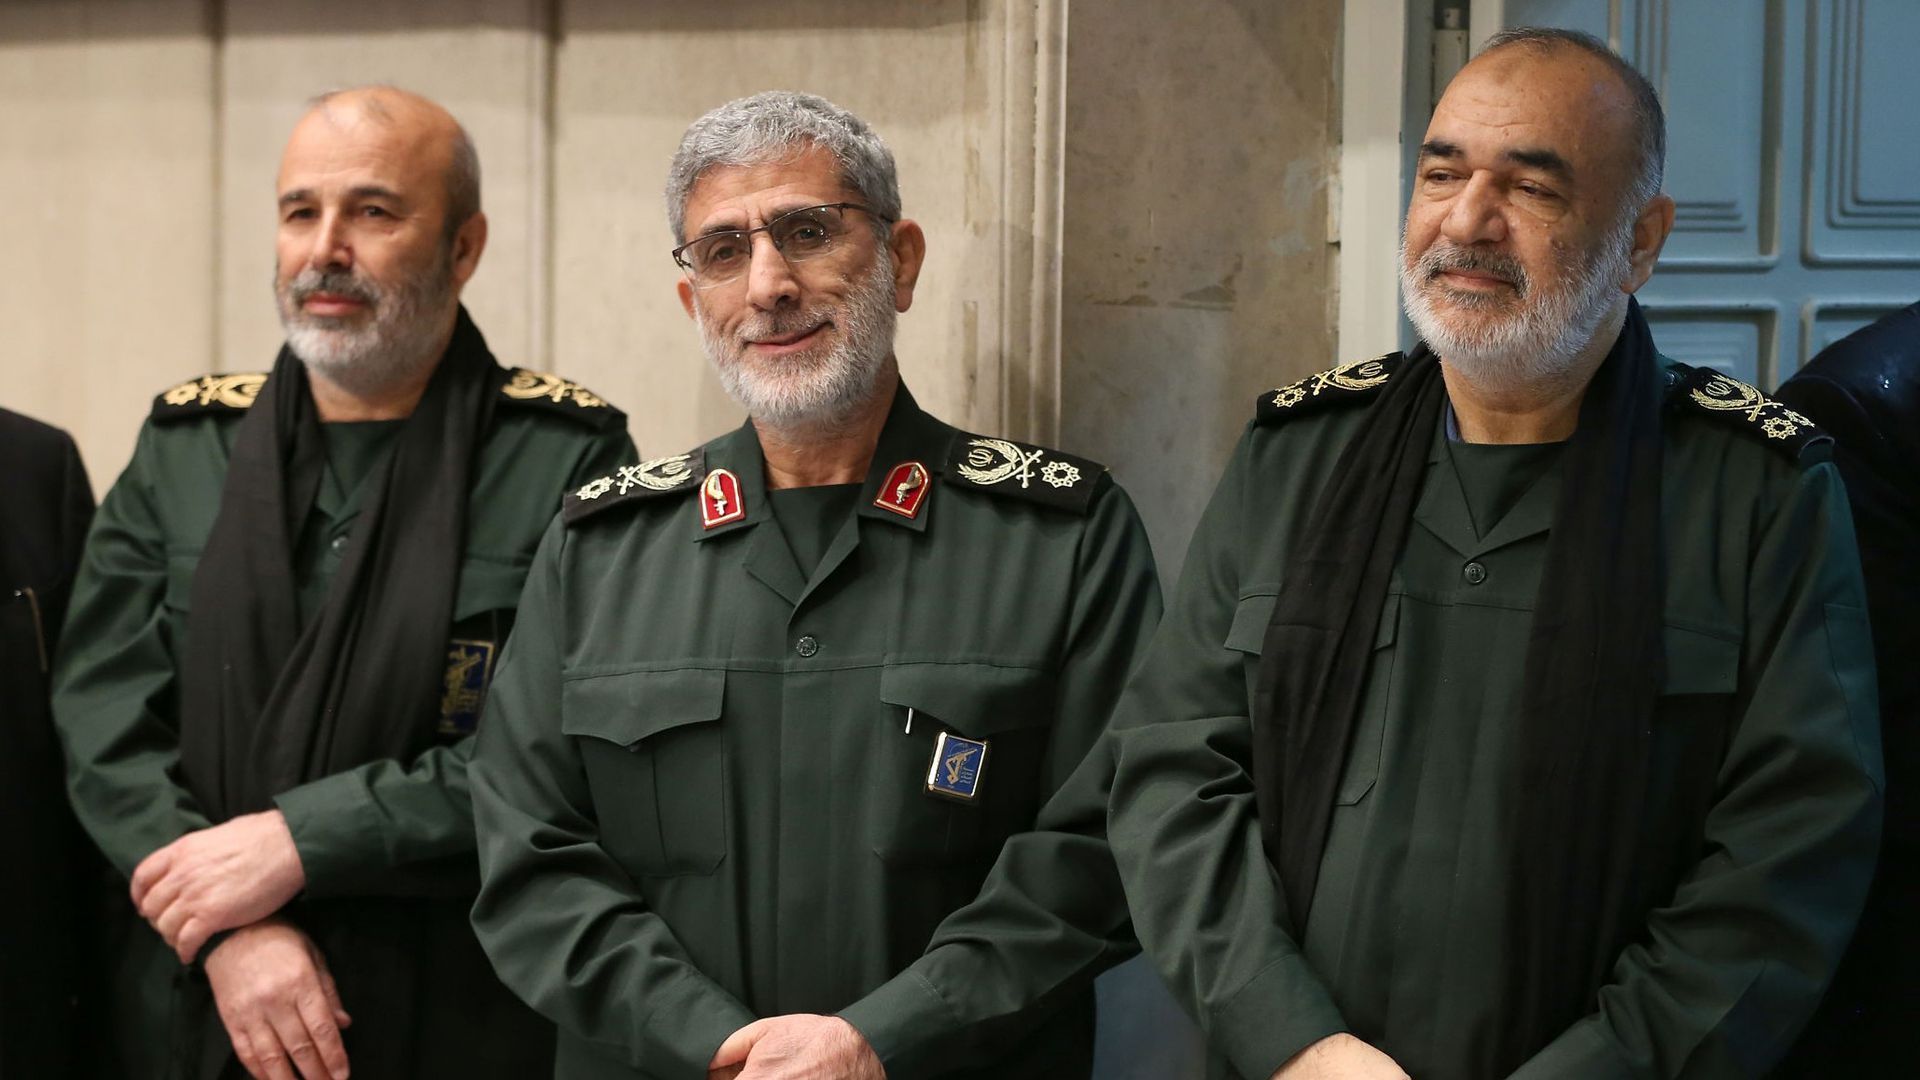 IRGC leaders in January 2020. Photo: Iranian Supreme Leader Press Office/Handout/Anadolu Agency via Getty Images)